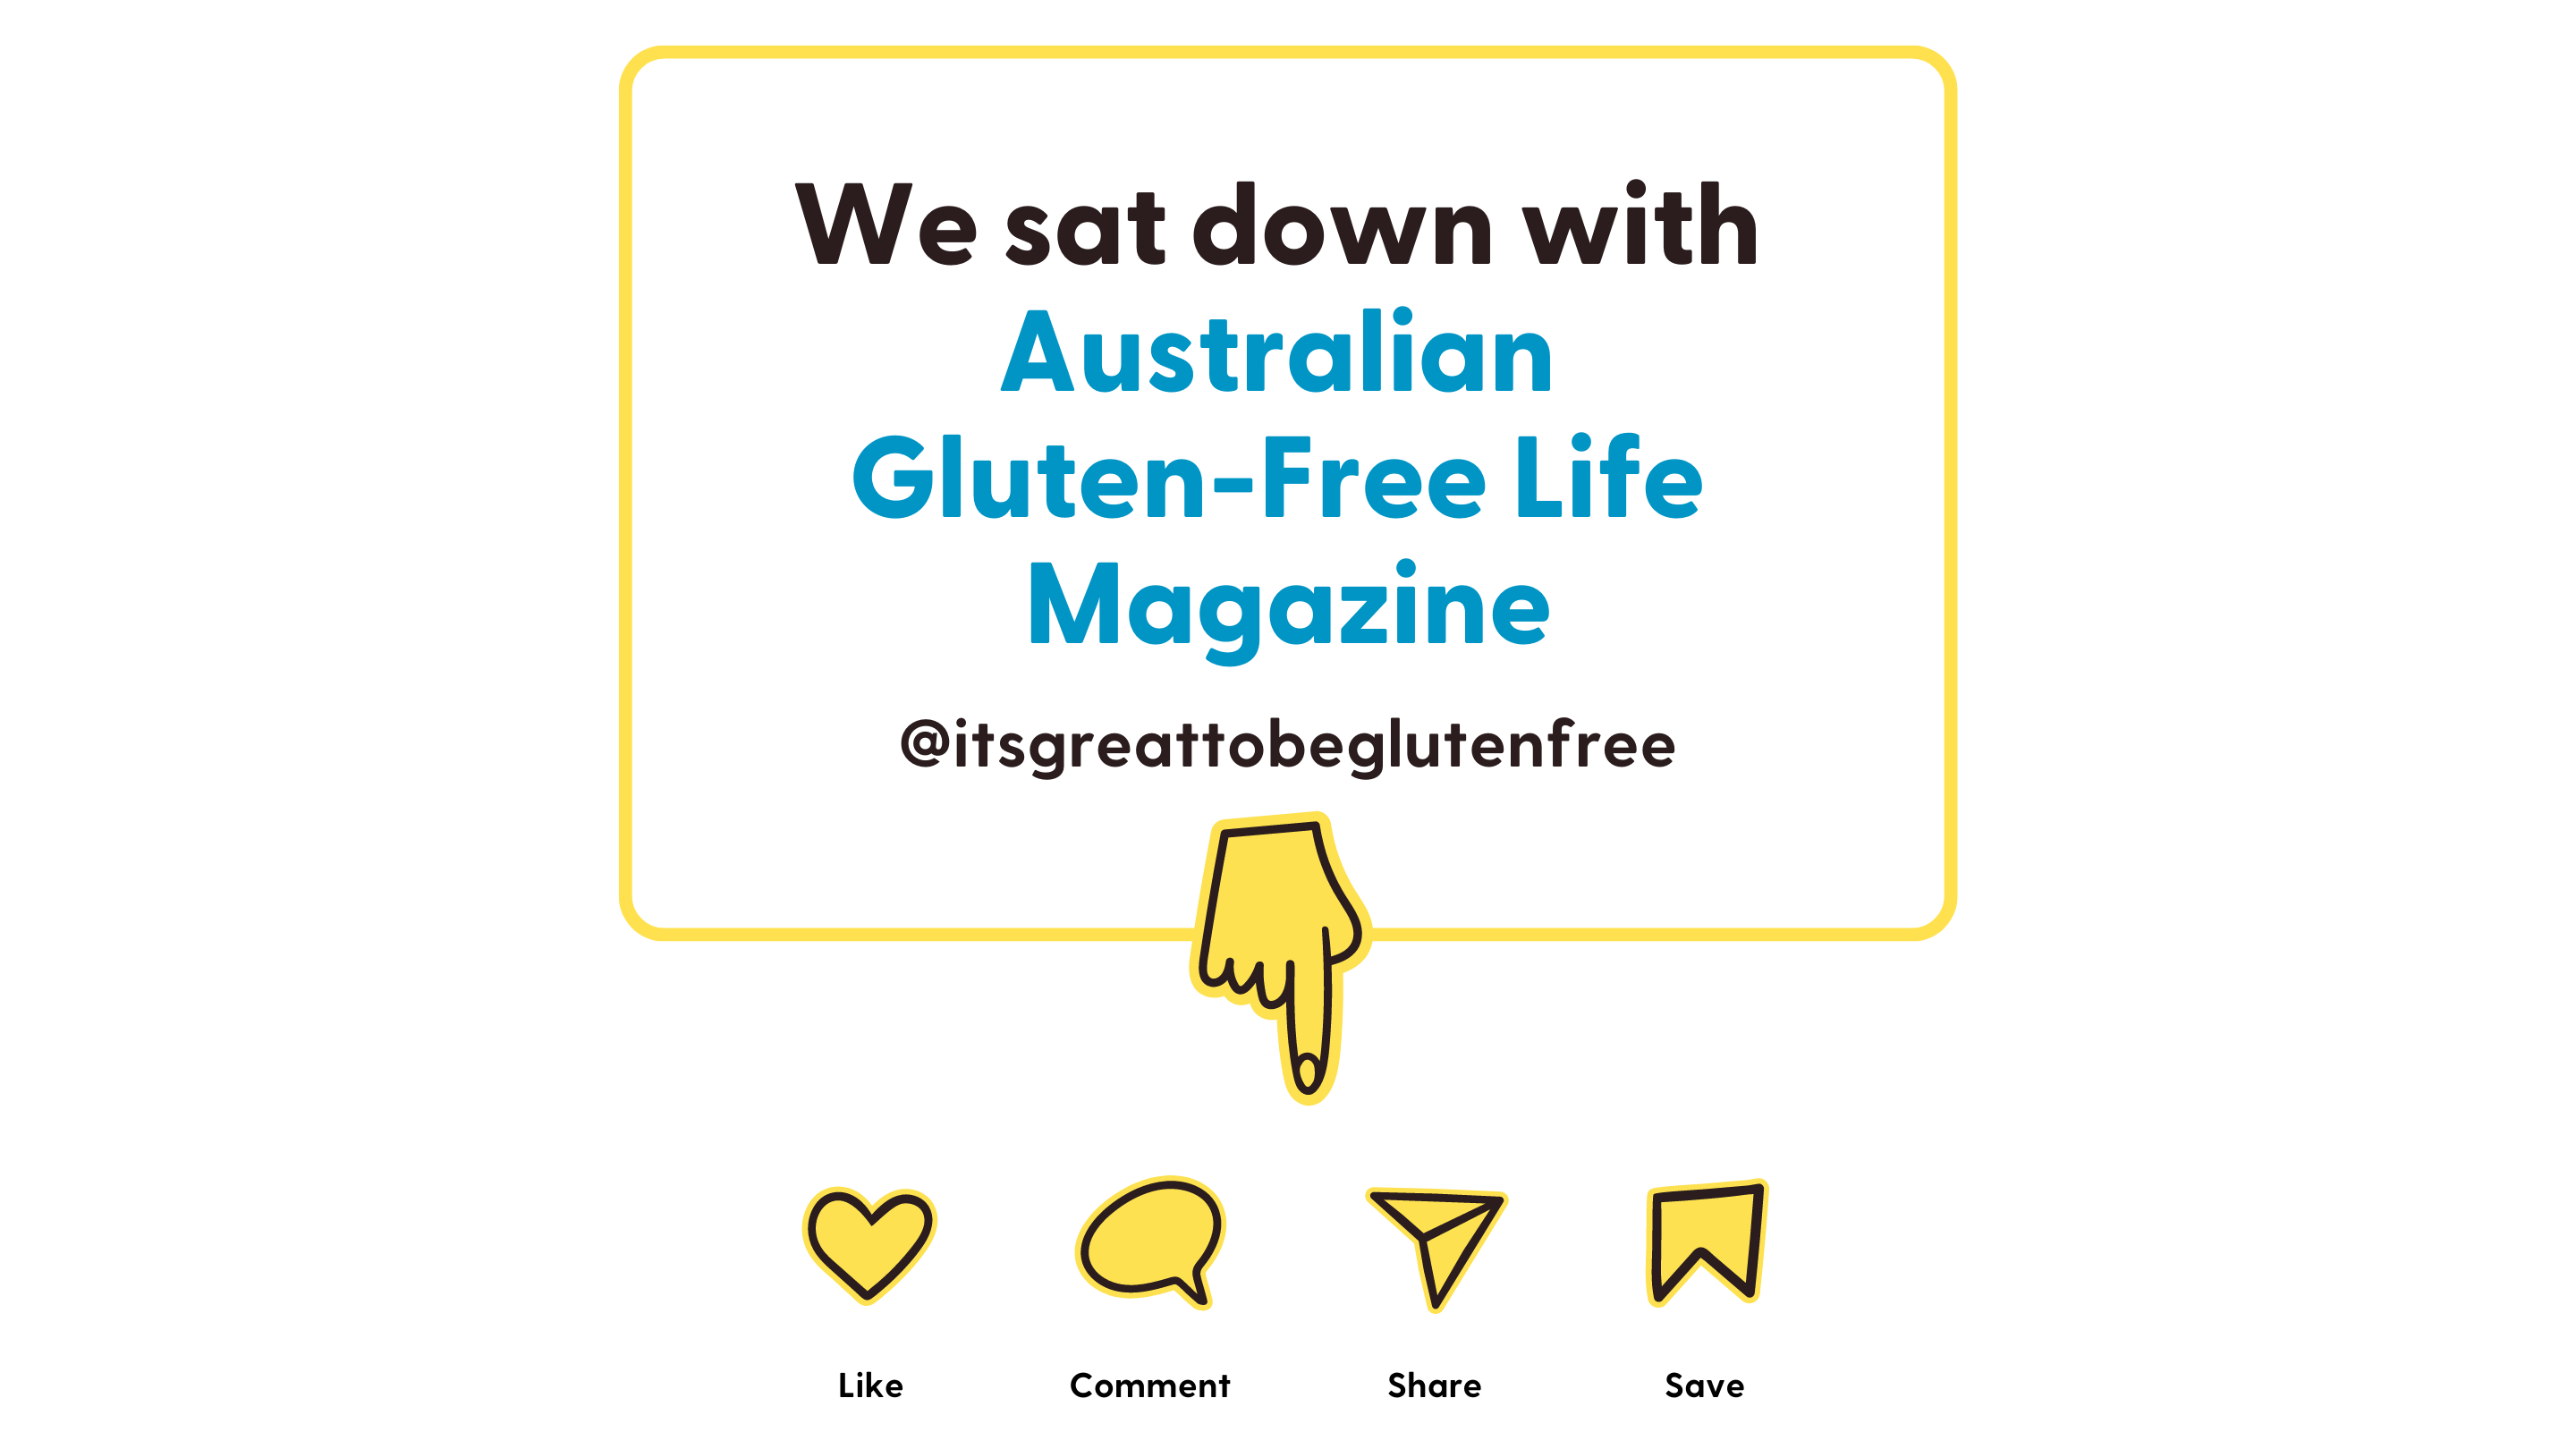 Our Interview with Australian Gluten-Free Life Magazine